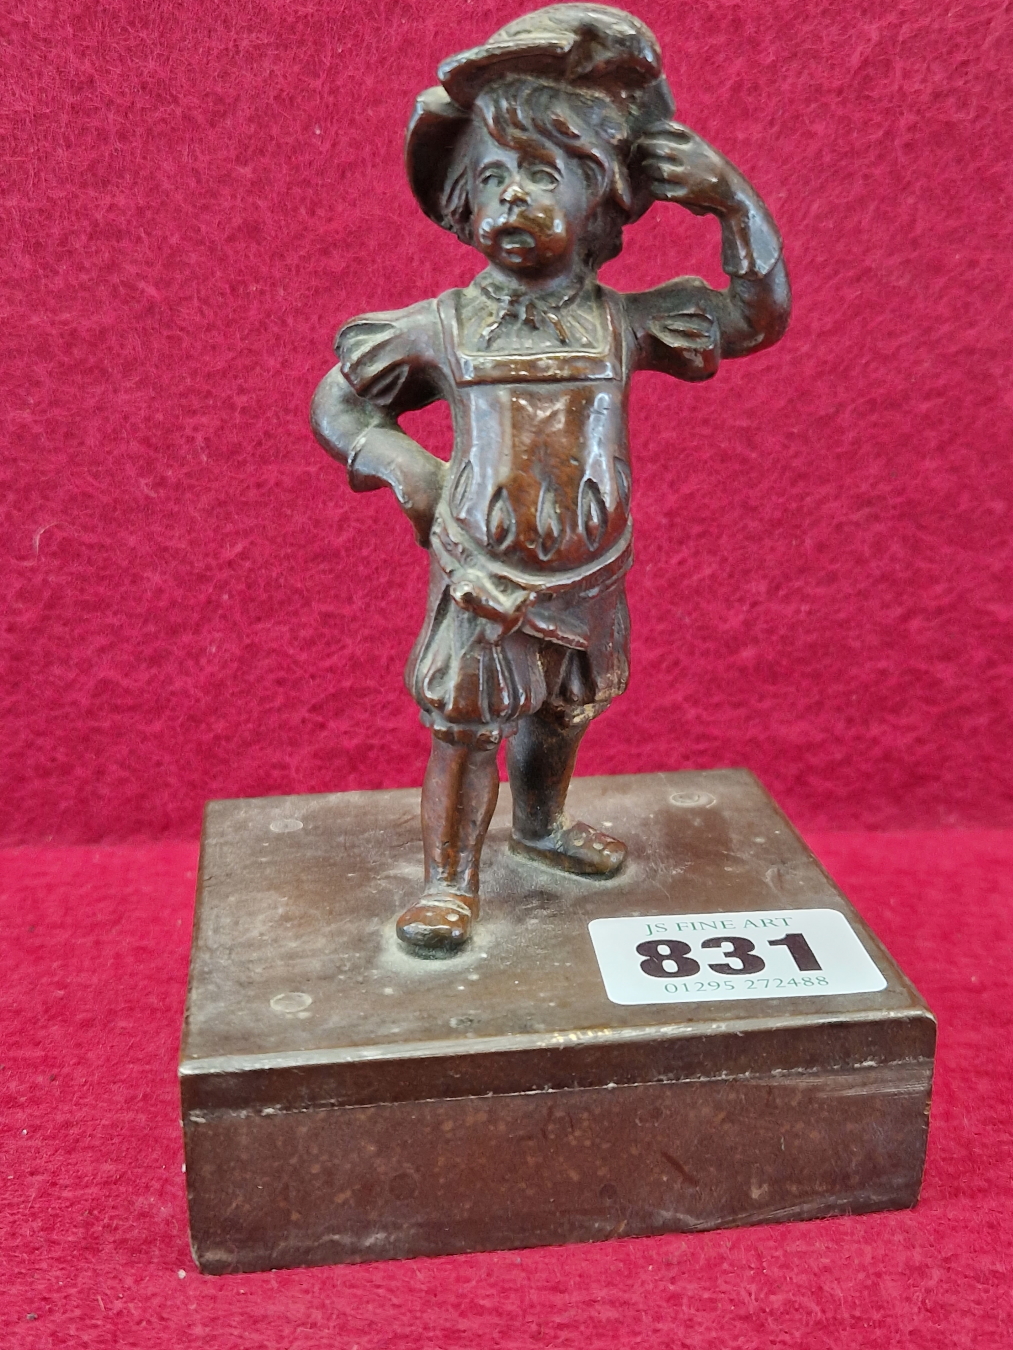 AN ANTIQUE BRONZE FIGURE OF A RENAISSANCE BOY WITH HIS RIGHT HAND ON HIS HIP AND HIS LEFT TO HIS